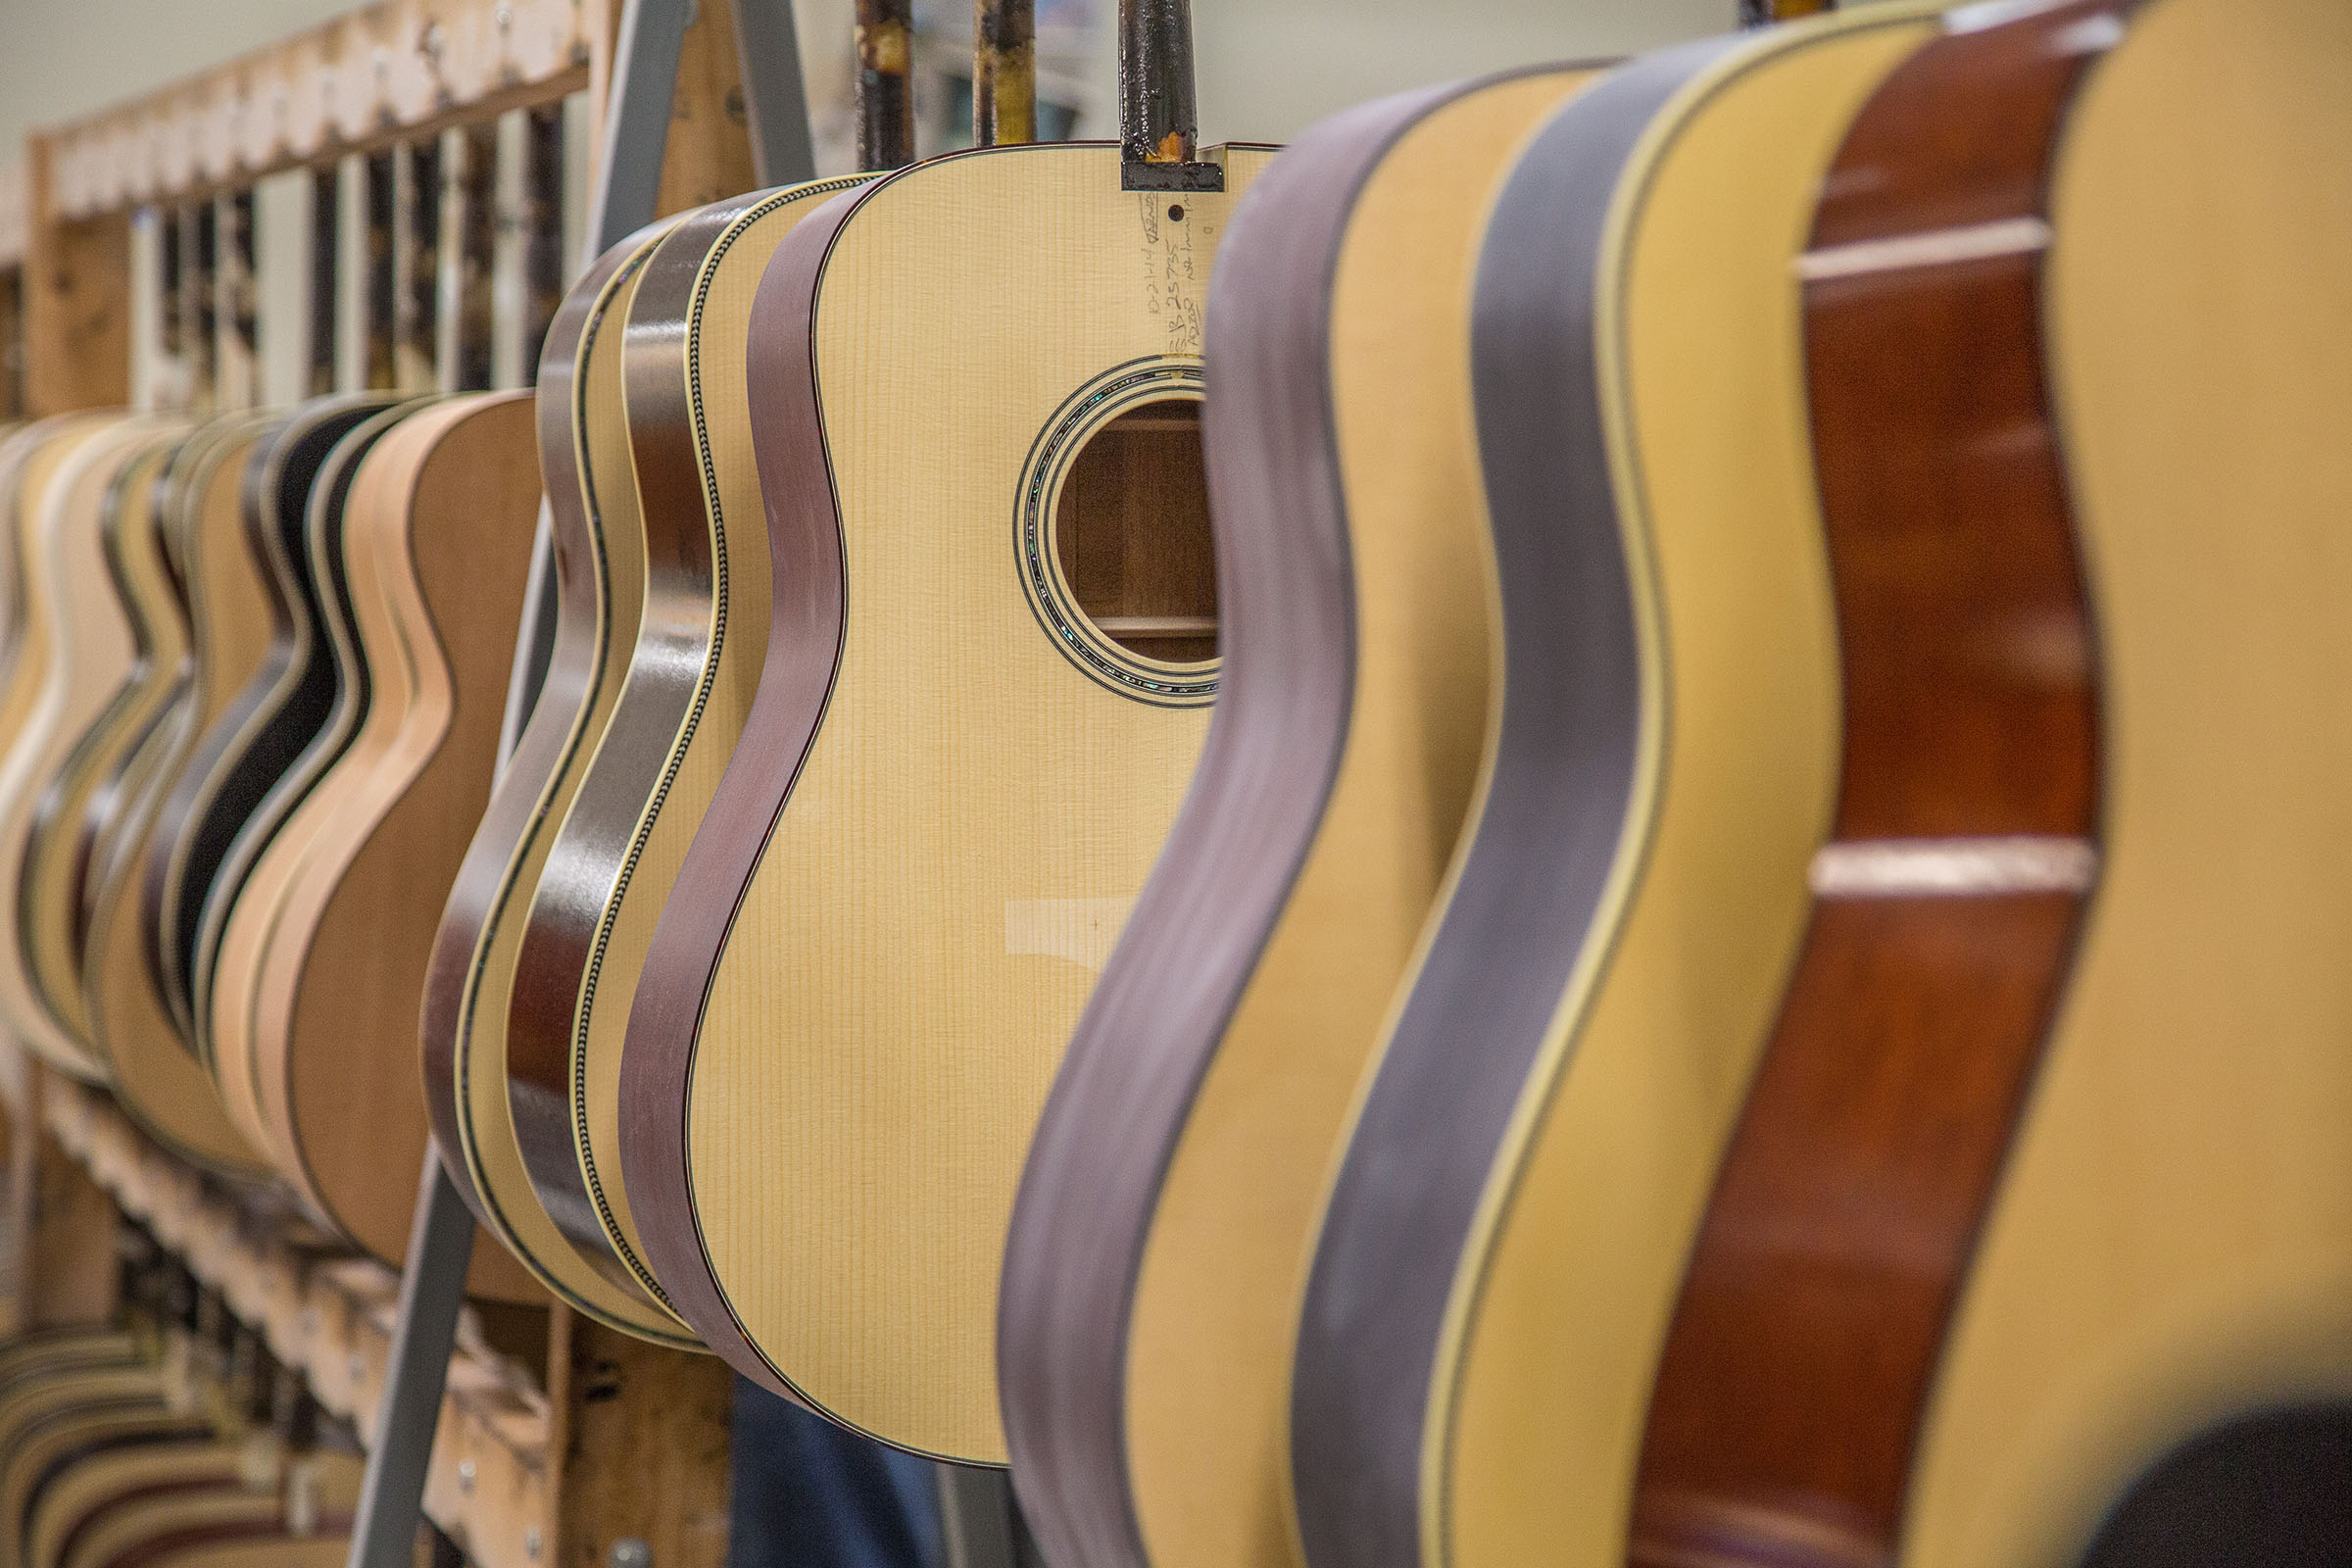 A collection of tan and brown guitars hang on a rack in a warehouse